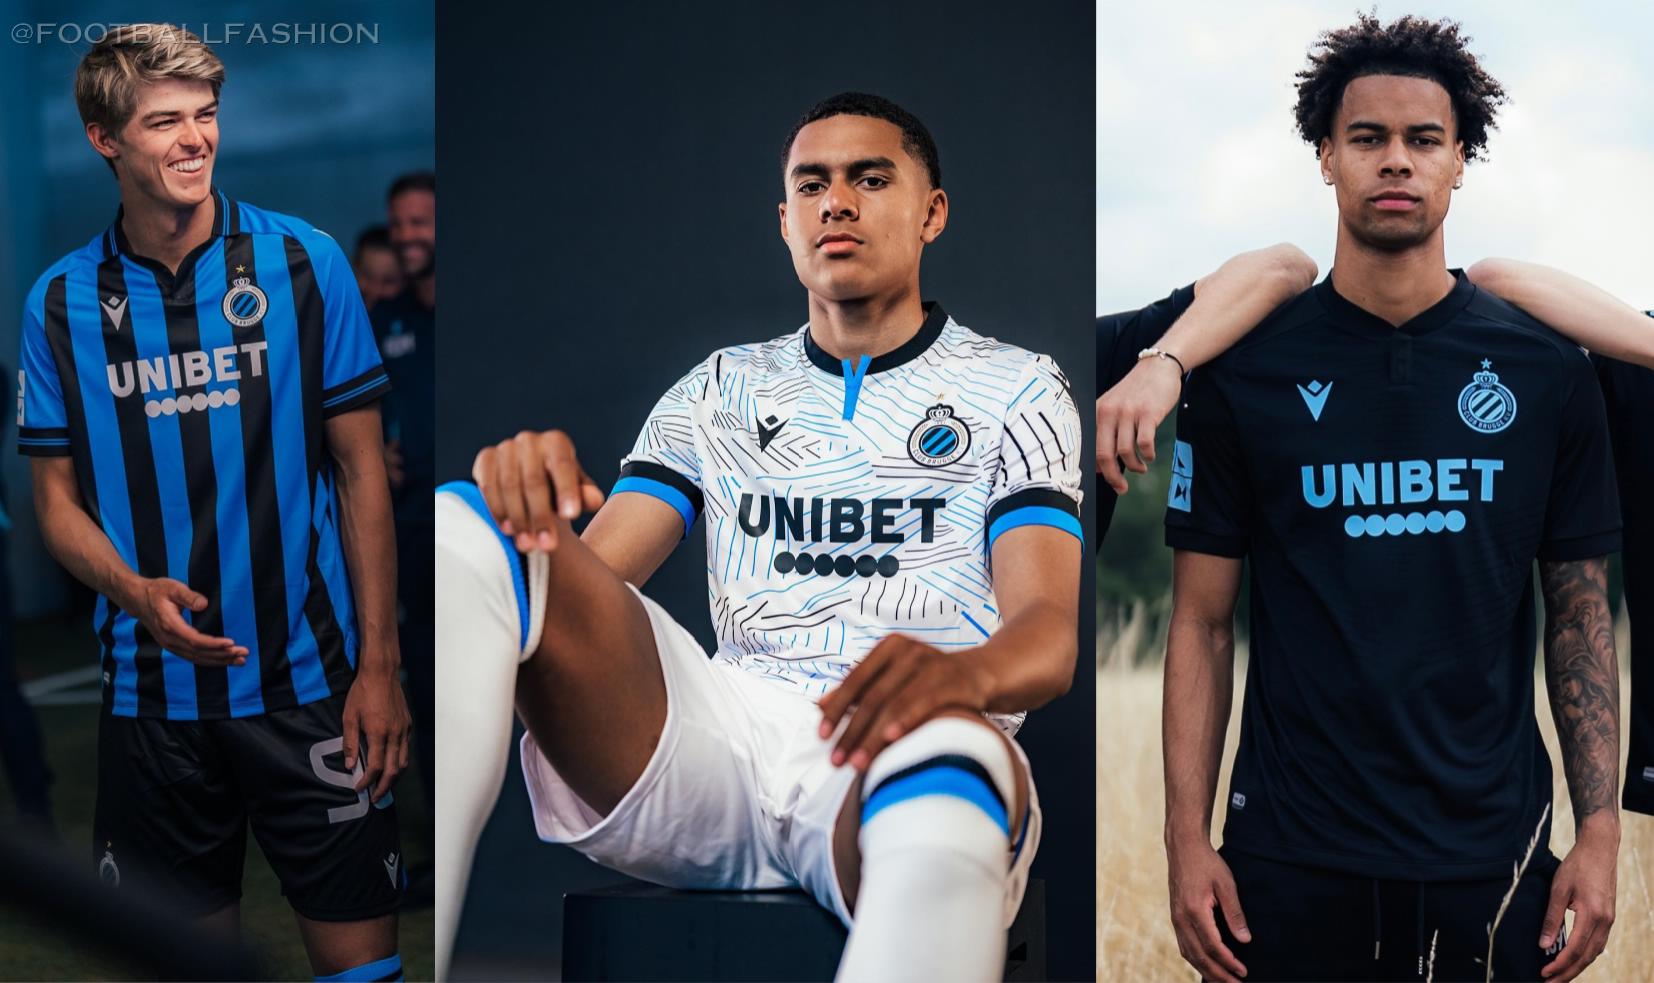 Macron Club Brugge Home Authentic Matchday Jersey 2022-2023